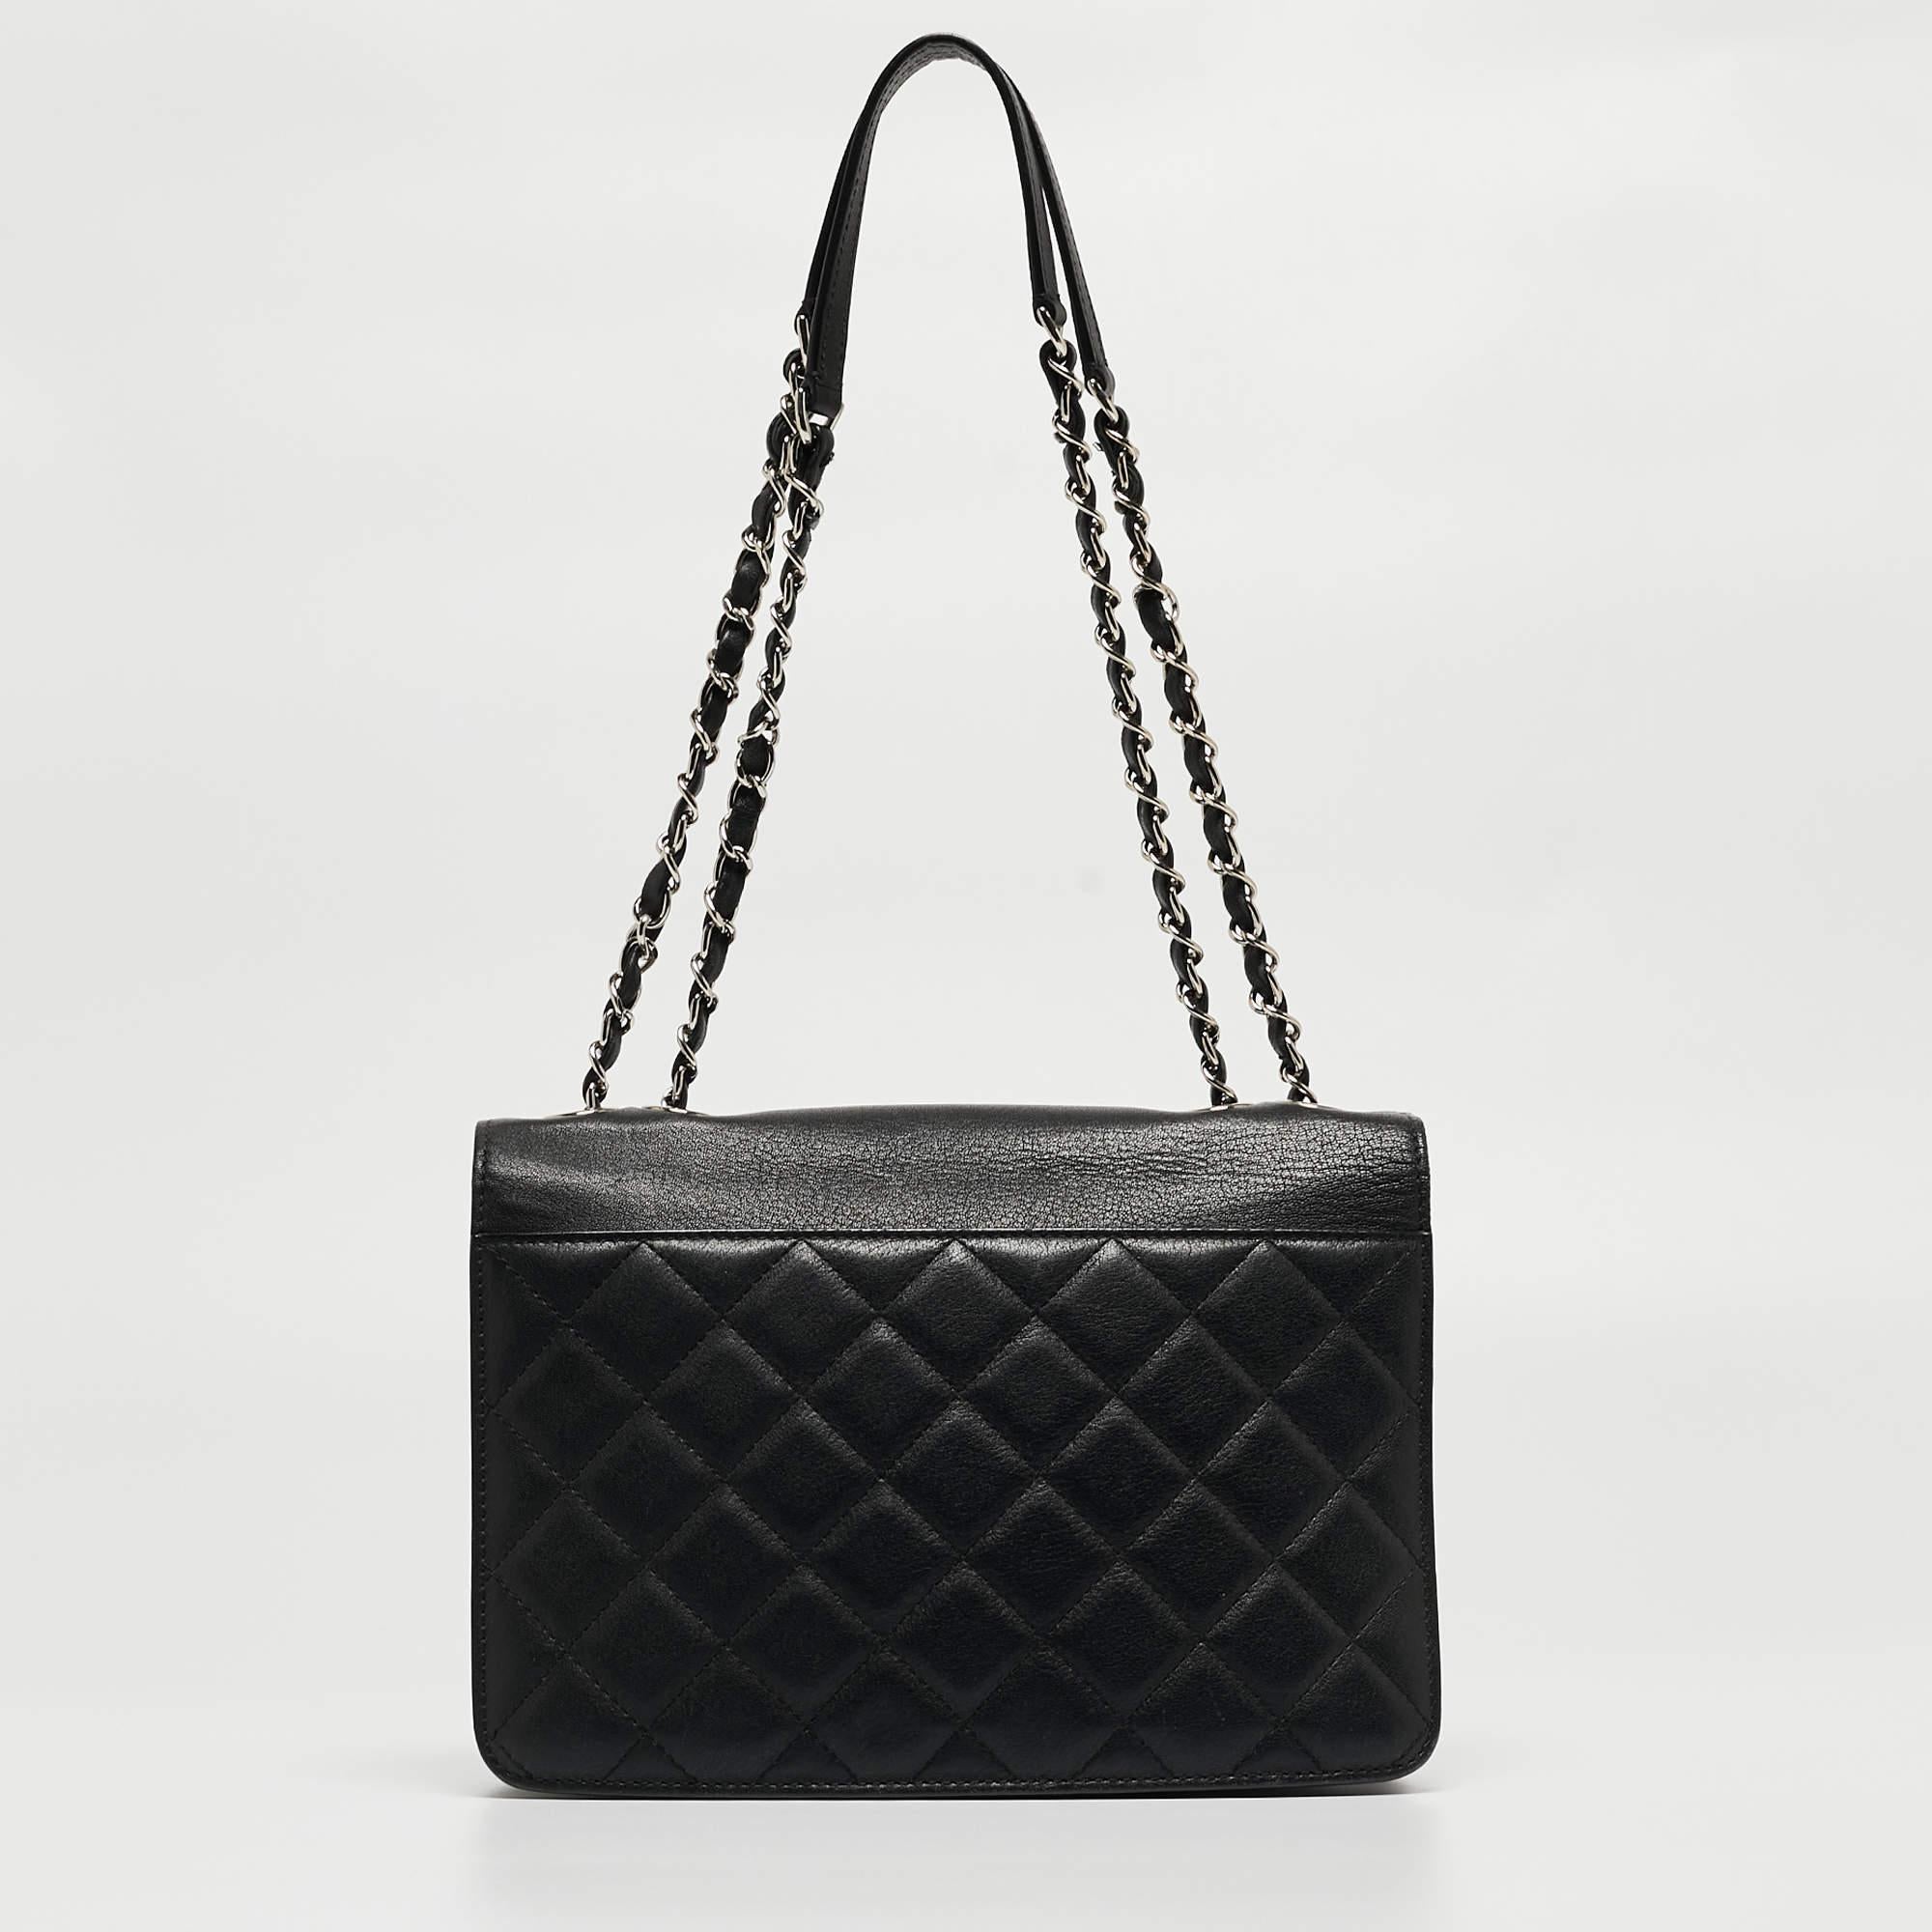 This Chanel box flap bag is the perfect accessory to dress up any outfit while remaining classy and minimalist at the same time. Crafted from black quilted leather, this small CC bag, with silver-tone hardware, shoulder straps, and fabric interiors